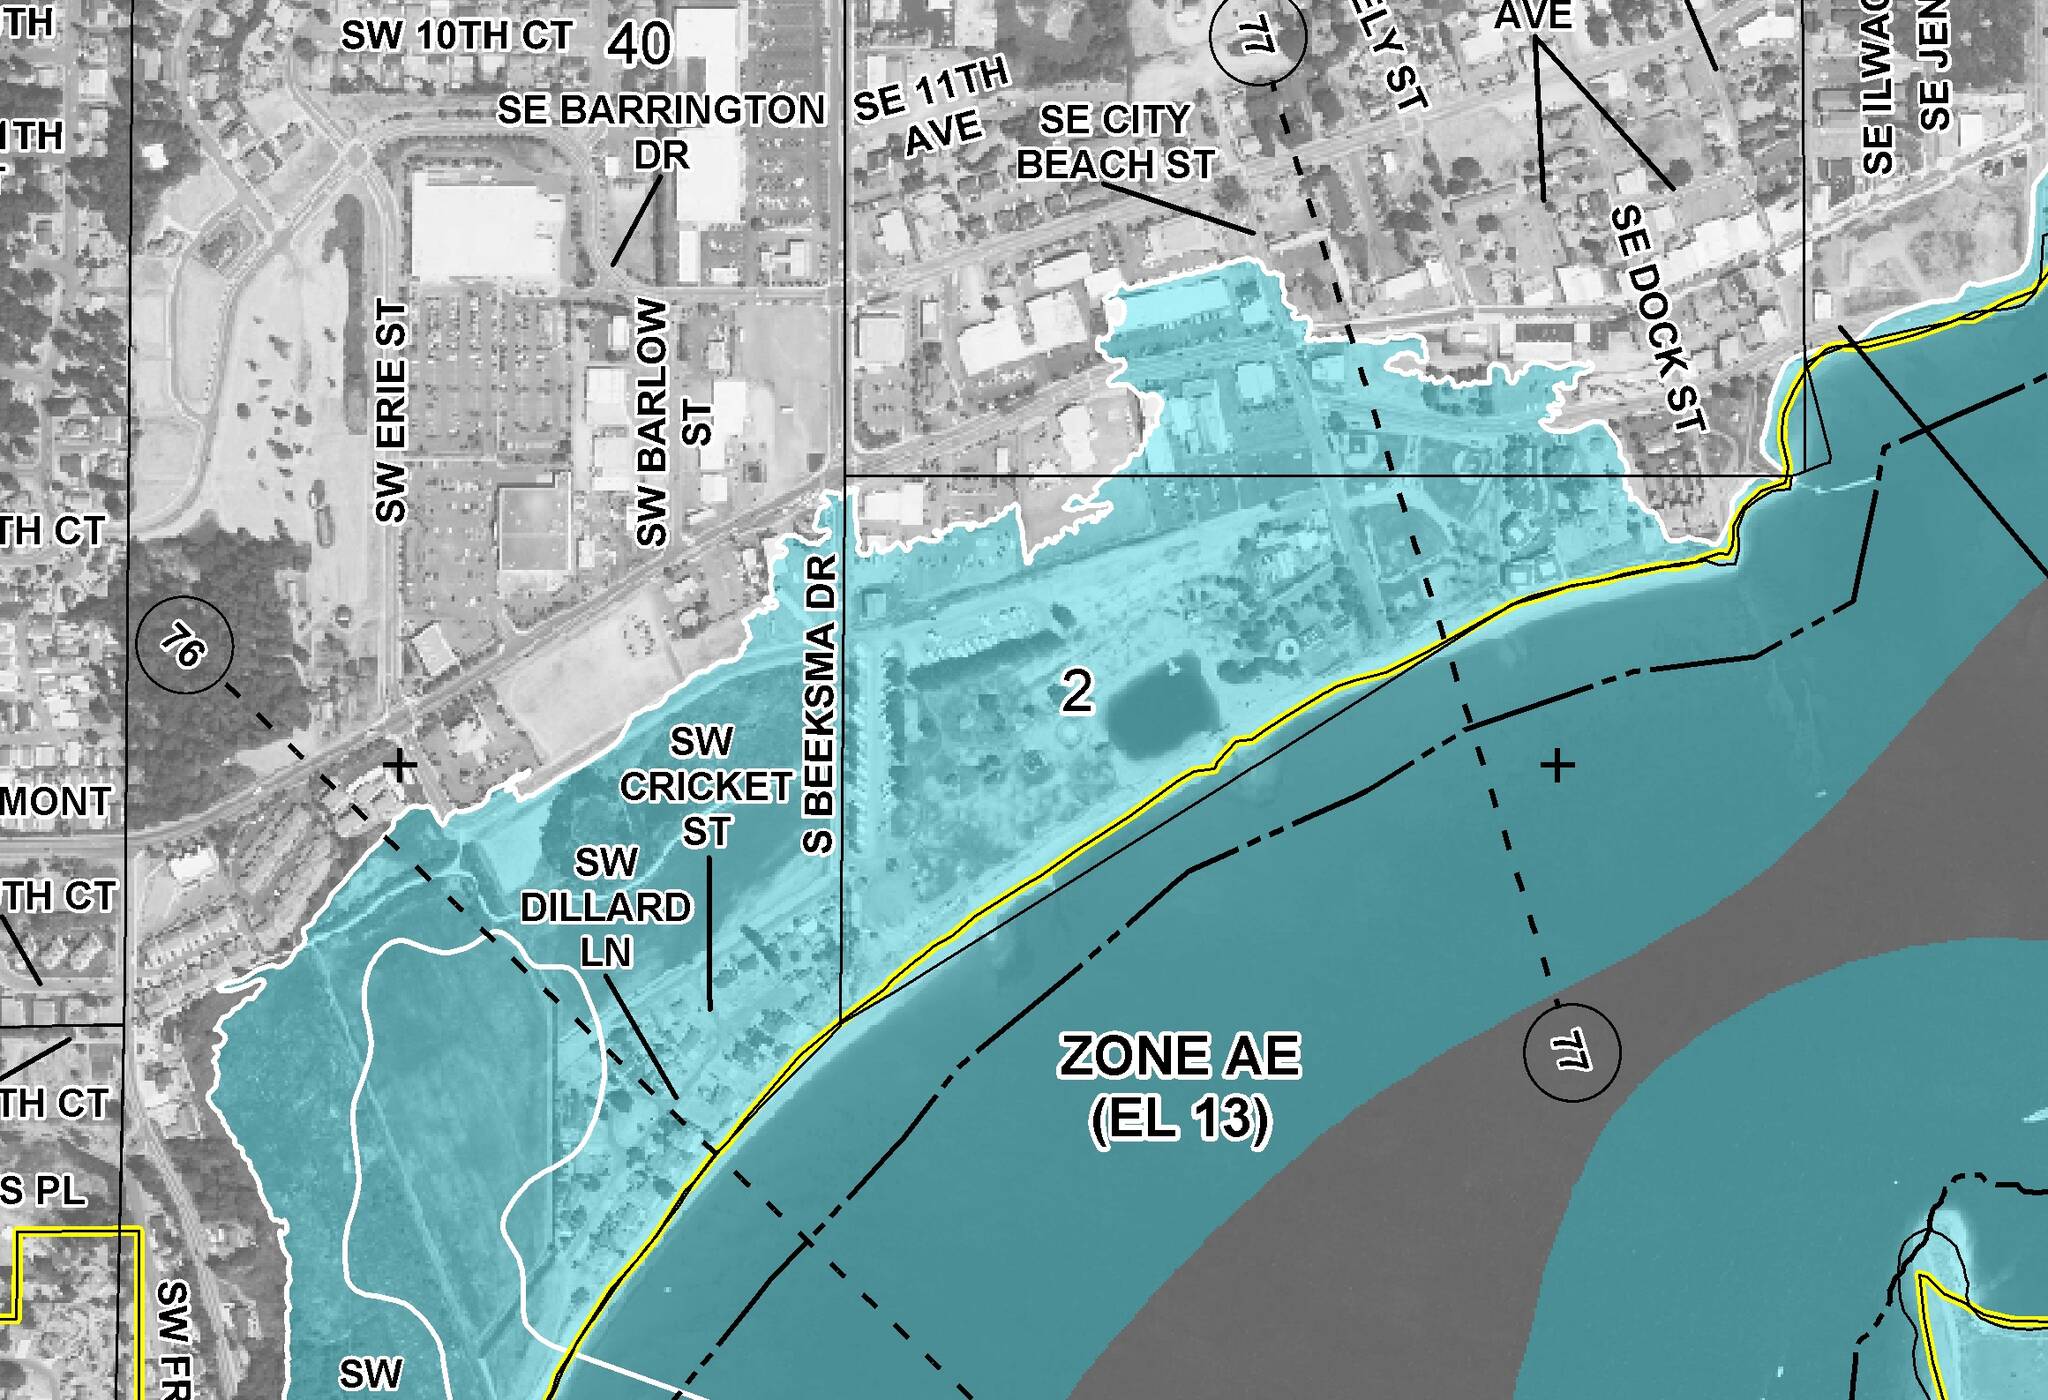 Map provided by FEMA
FEMA released a map that shows that area of shore line that could be affected by high tides.